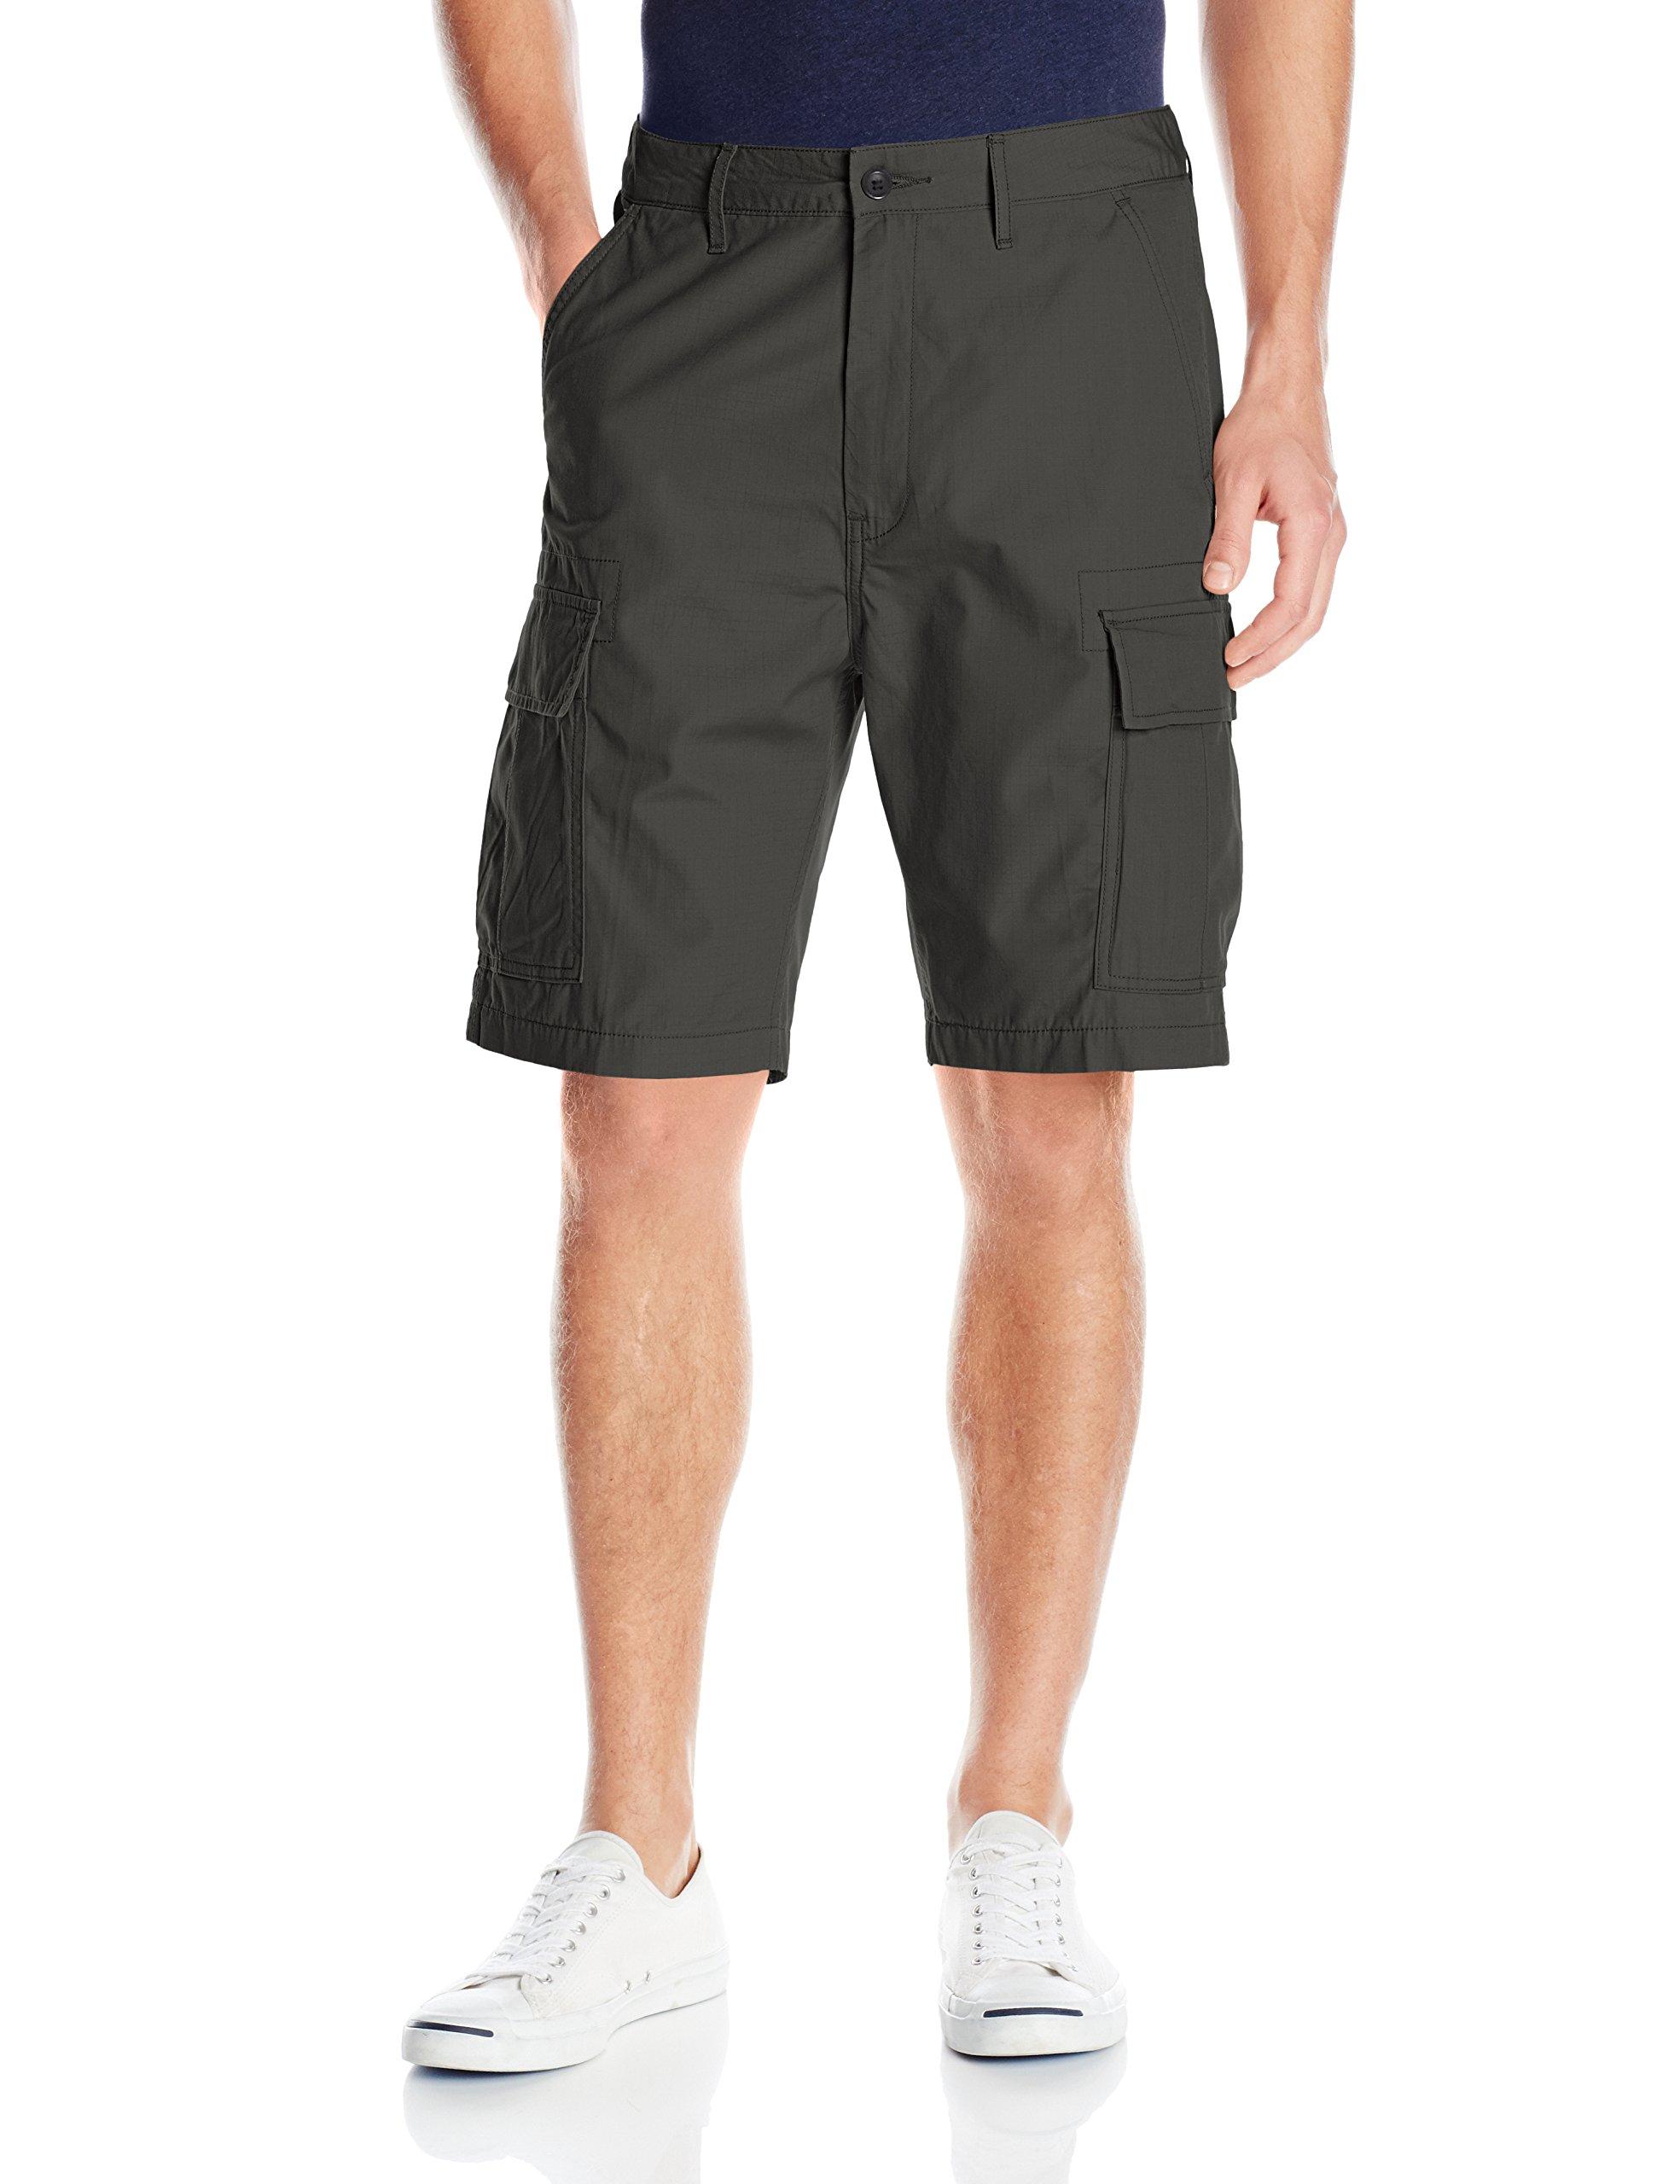 Levi's Big & Tall Carrier Cargo Short in Gray for Men - Lyst